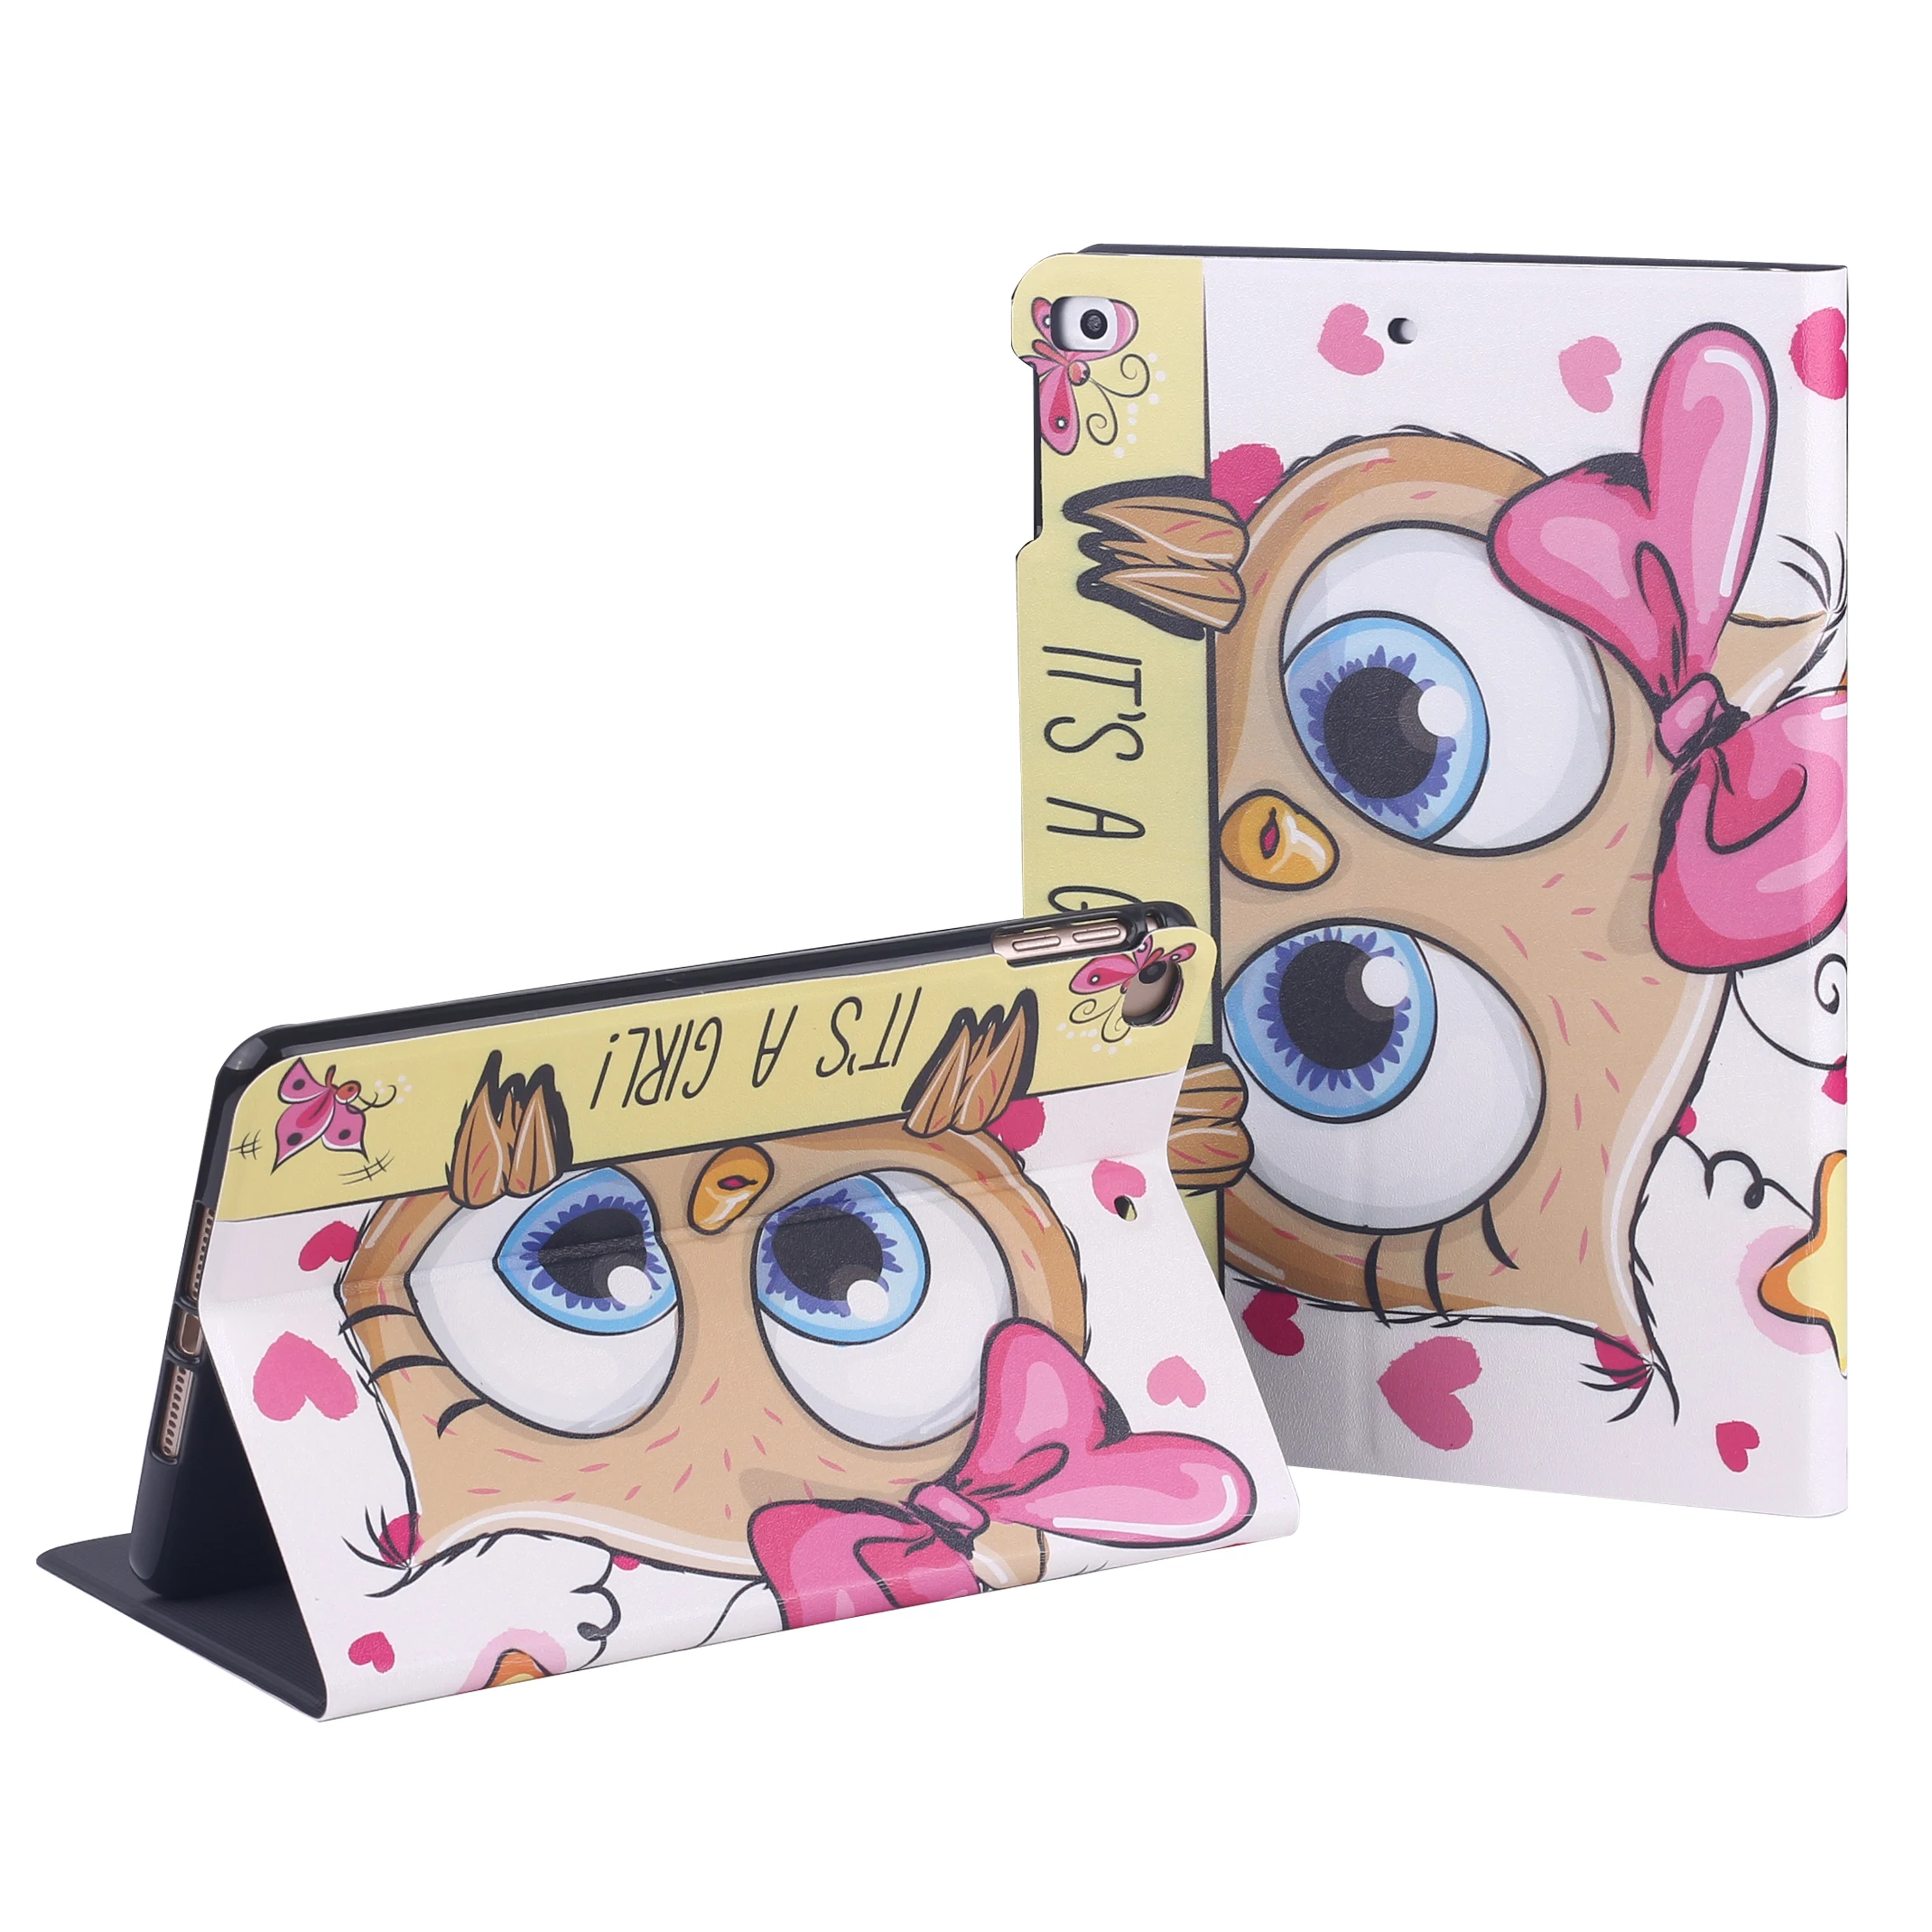 

Cartoon Owl Baby Fashion Tablet case For 2020 New iPad 9.7 Air 1 2 Stand Shell Anti drop/Dust For iPad 2 3 4 Mini 2 3 4 5 Case